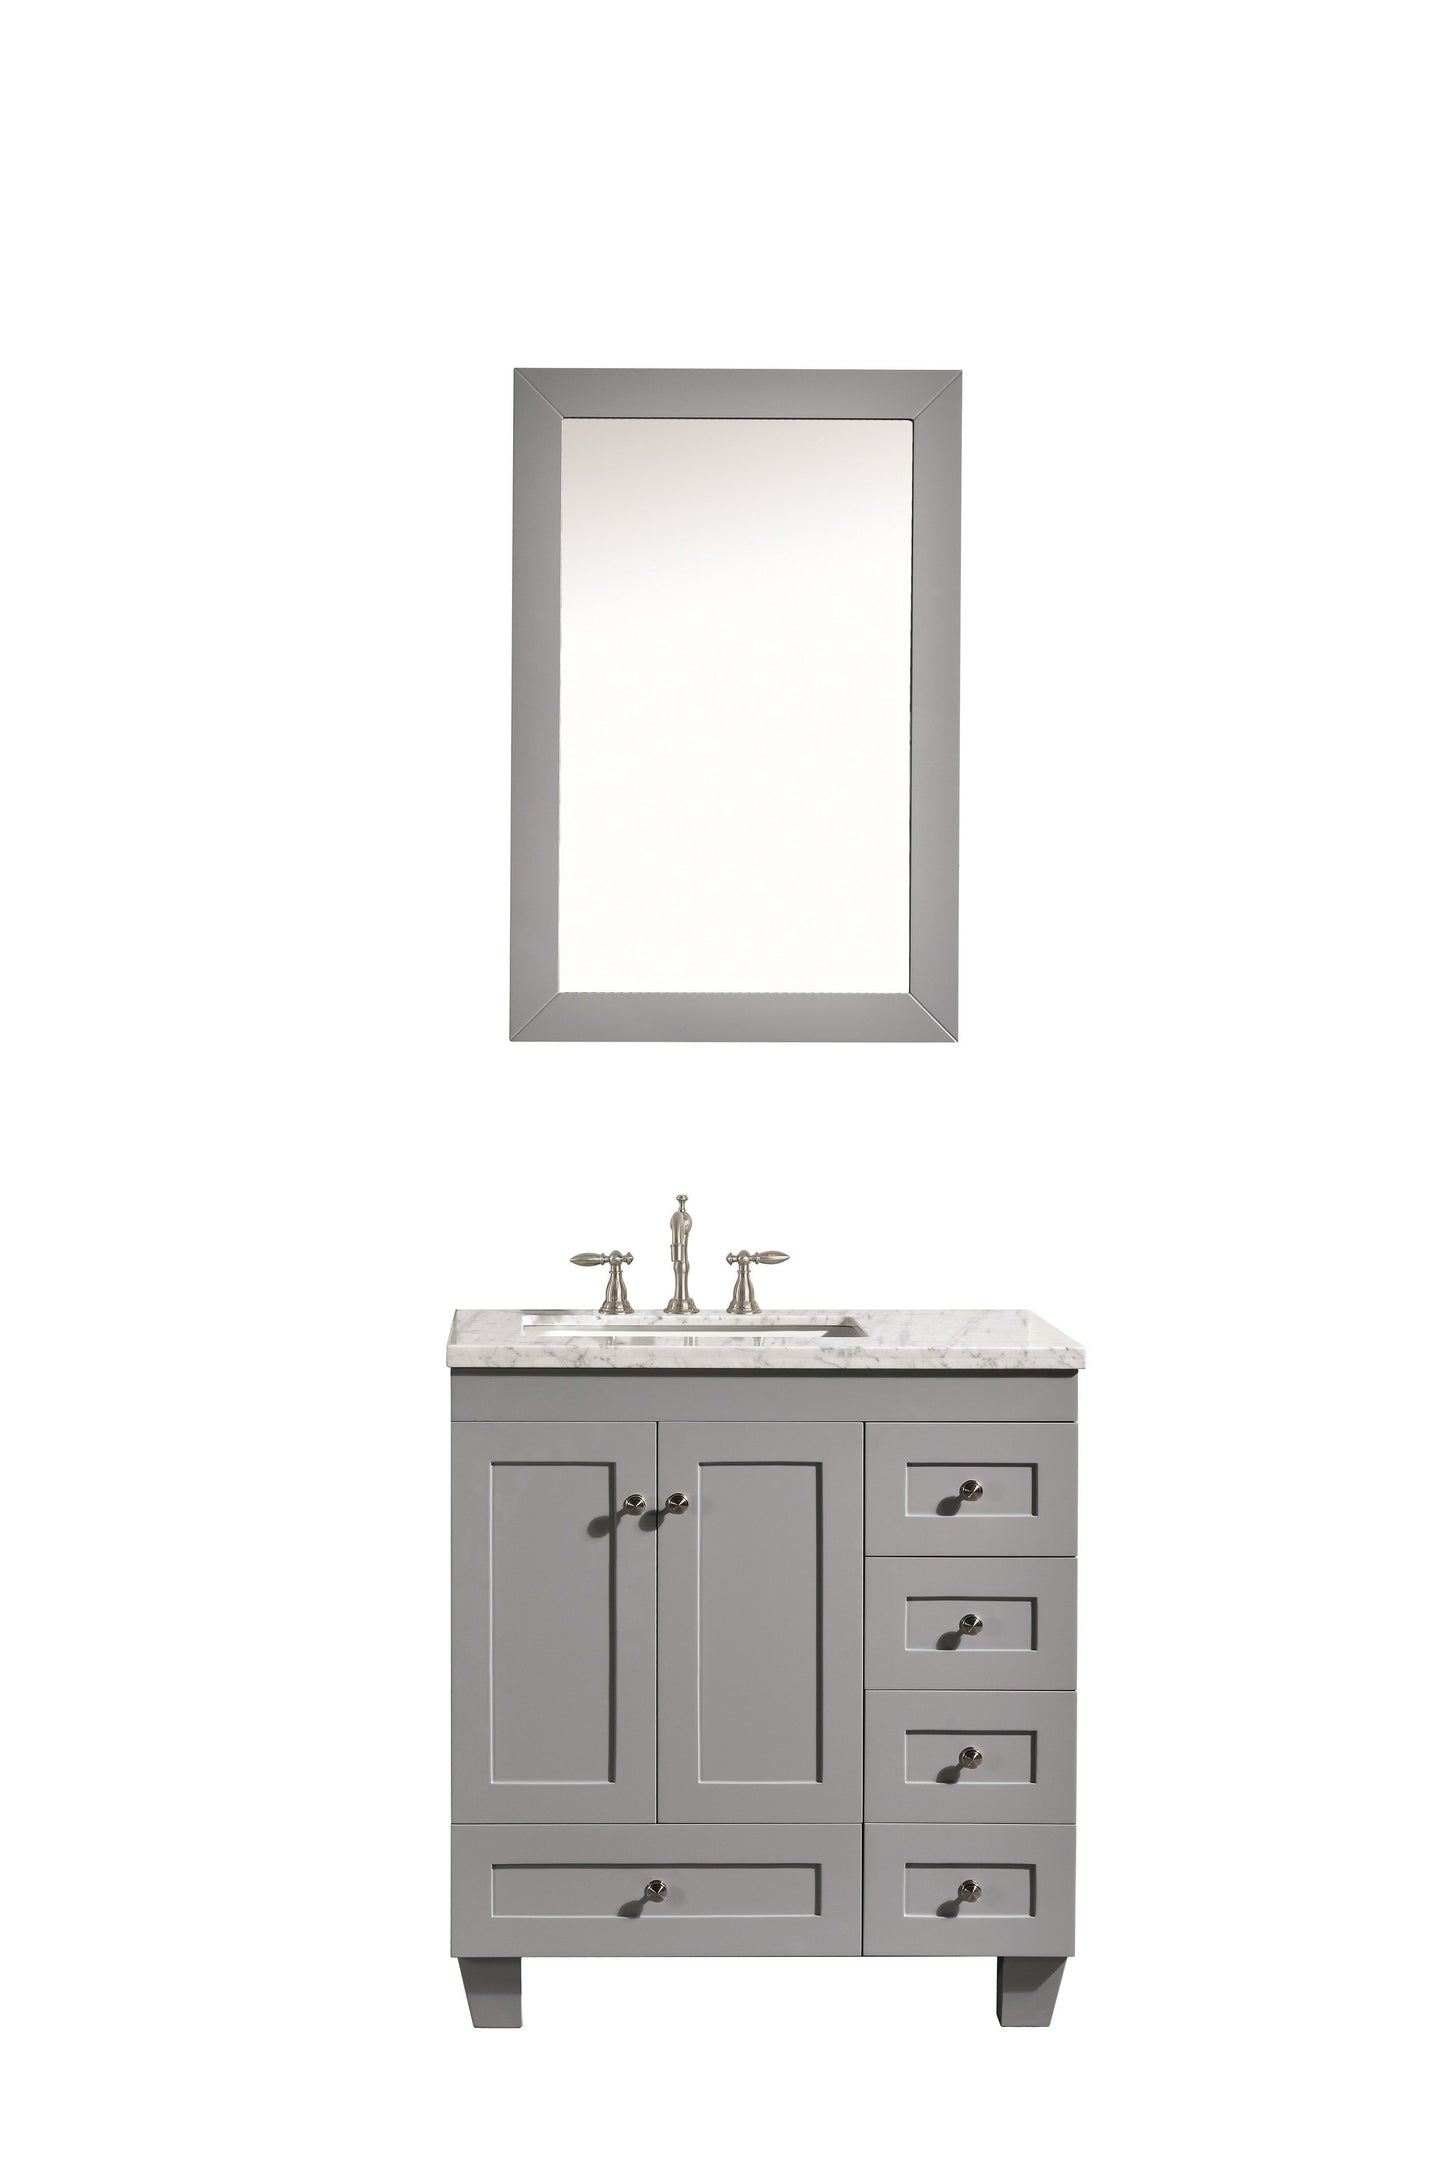 Eviva Acclaim C. 30" Transitional Espresso Bathroom Vanity with white carrera marble counter-top - Luxe Bathroom Vanities Luxury Bathroom Fixtures Bathroom Furniture